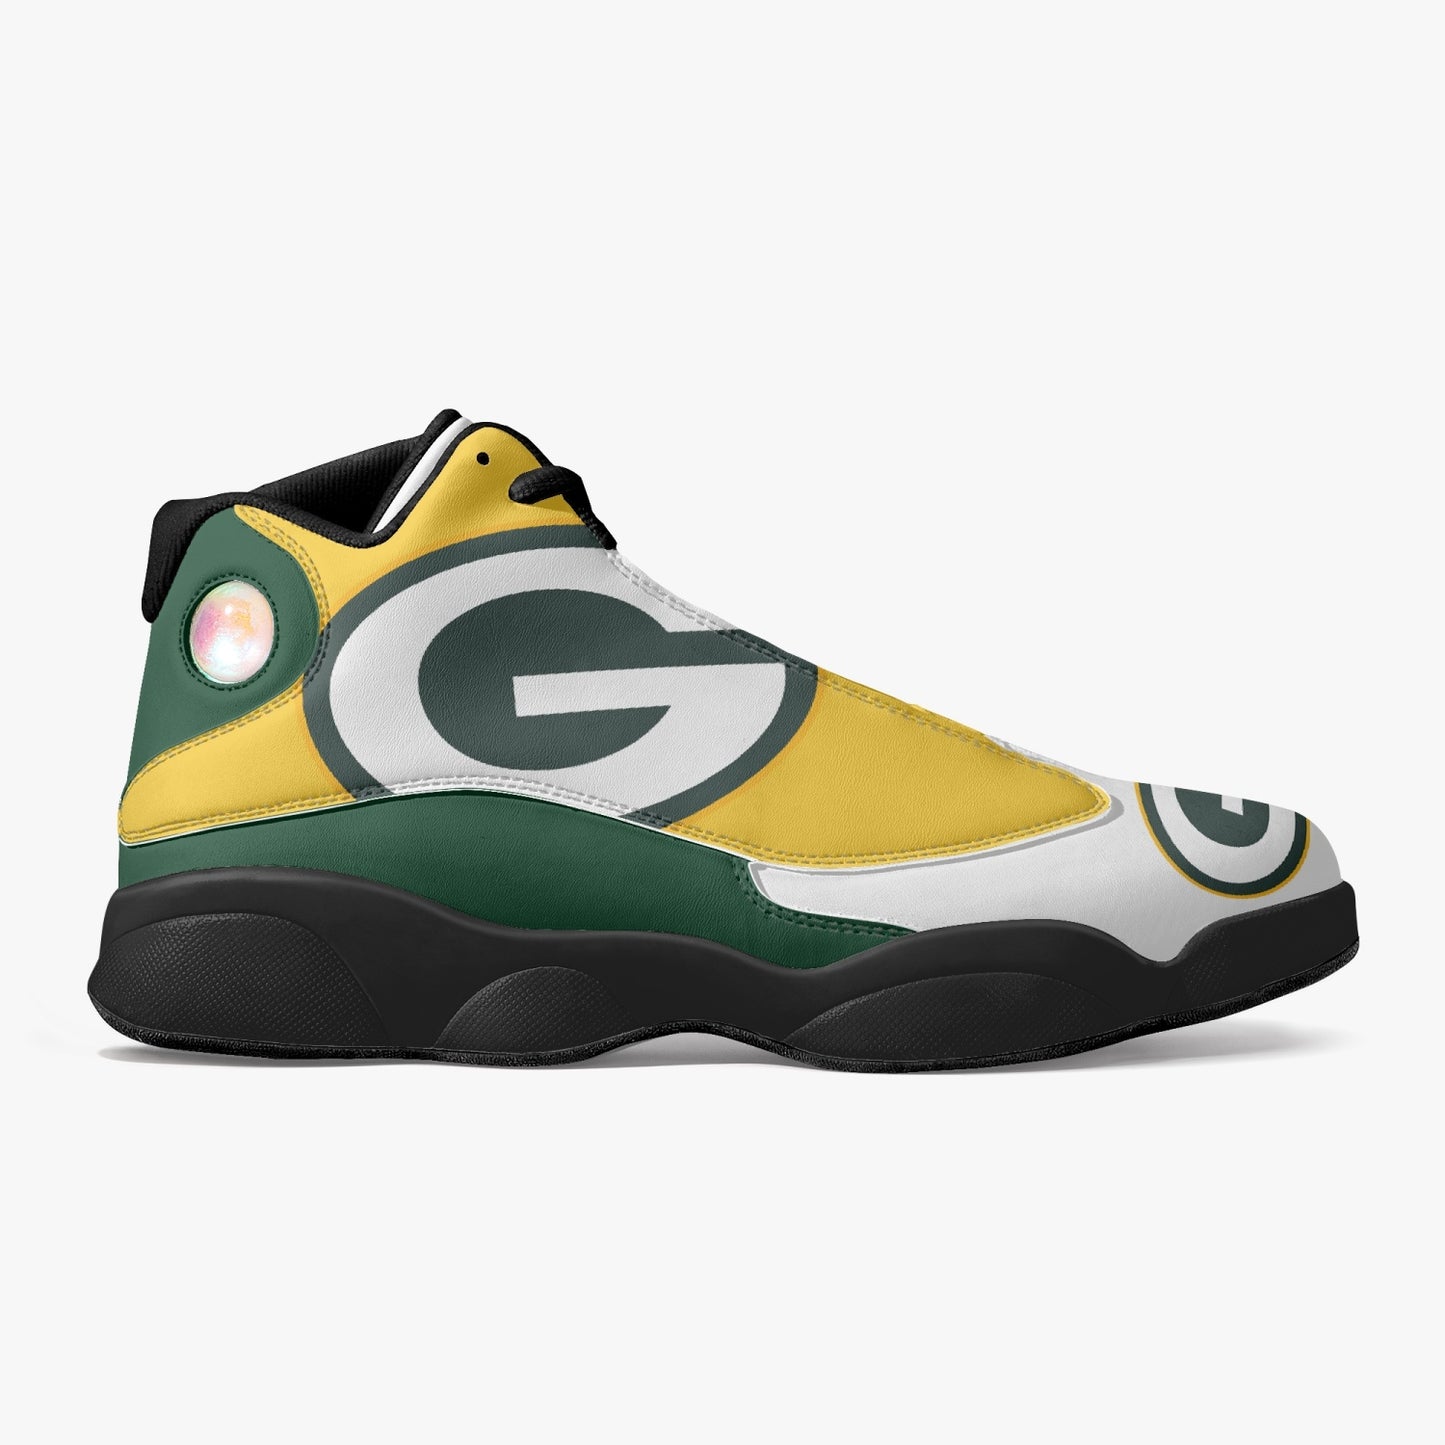 Green Bay Title Town Edition "White Toe" Sneakers - Green/Gold/White/Black